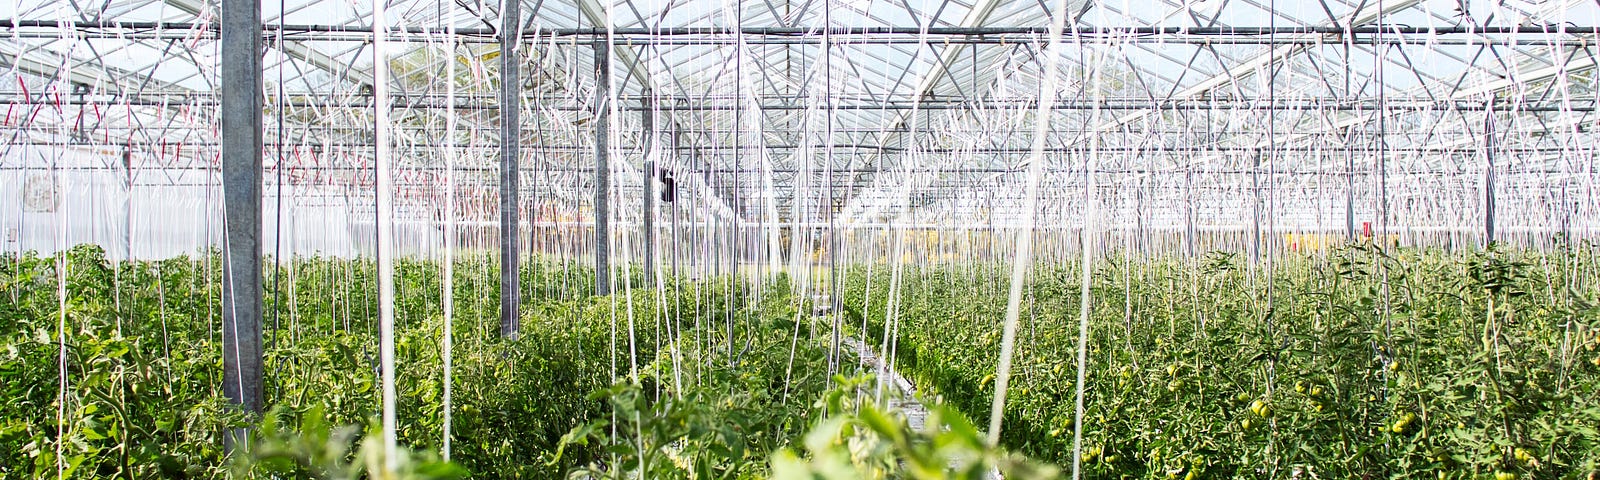 A greenhouse: rows of plants with long white watering tubes hanging down from the ceiling.